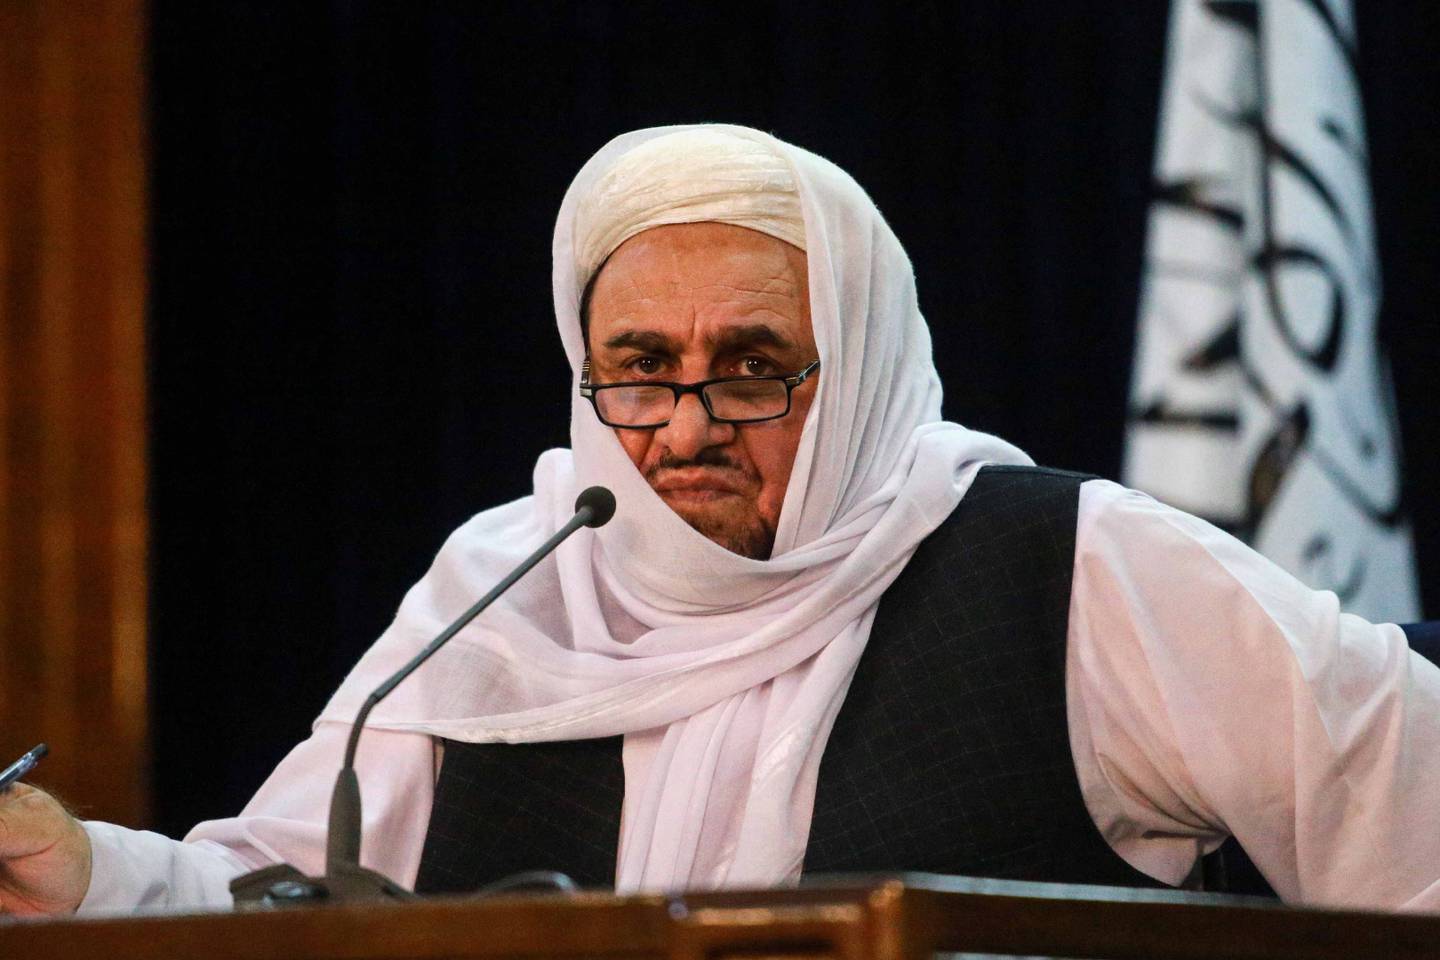 Taliban say women can study but only in segregated classes